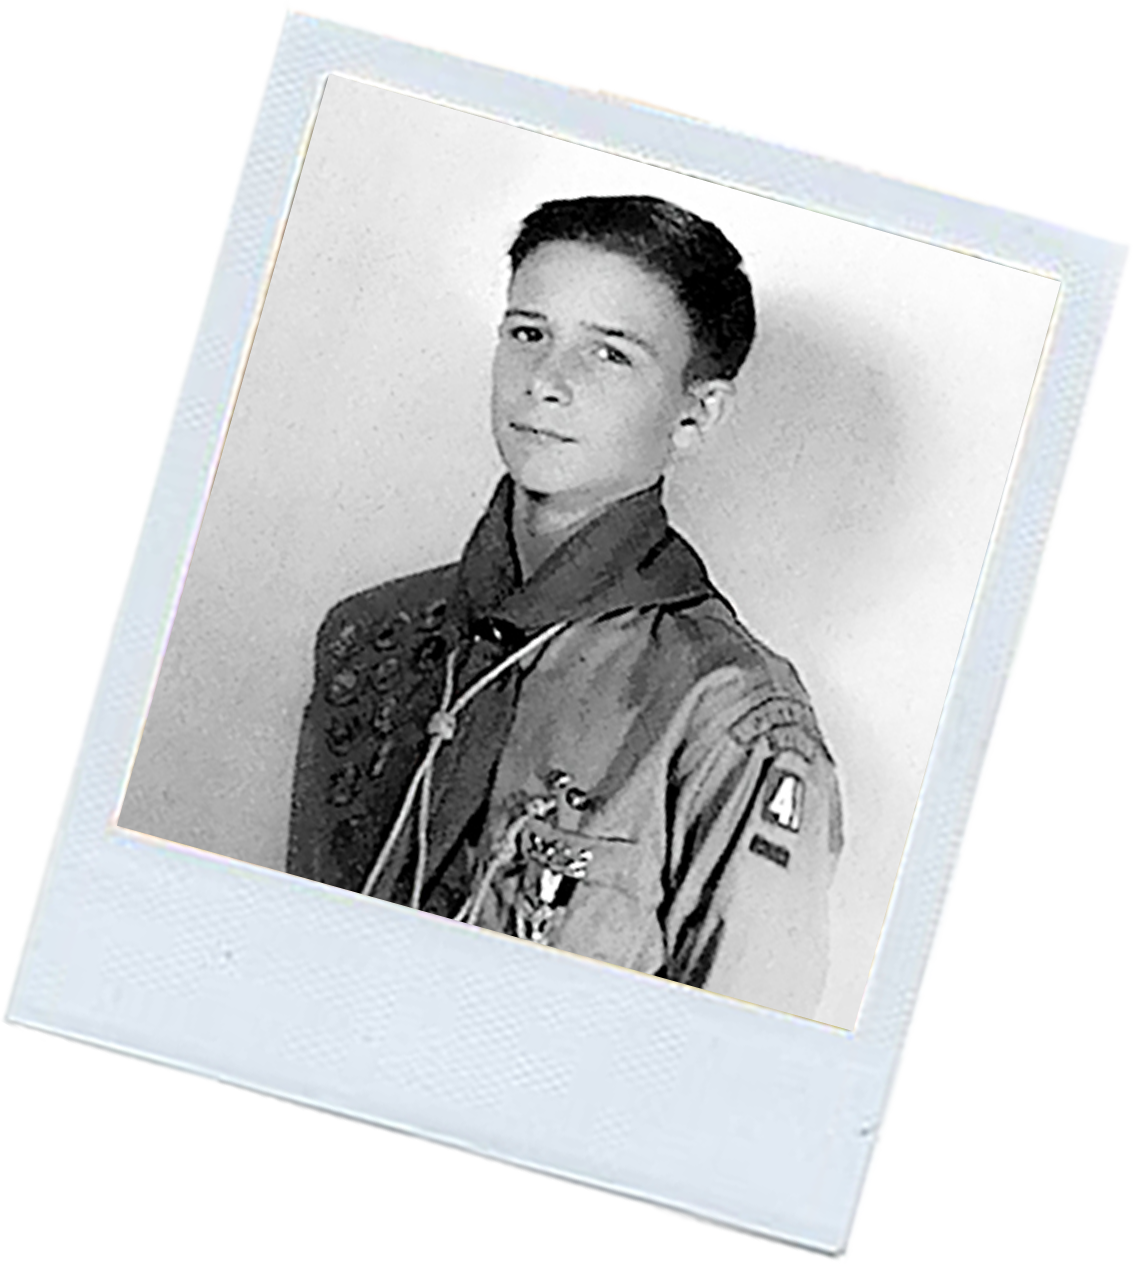 Young EO Wilson in scout uniform